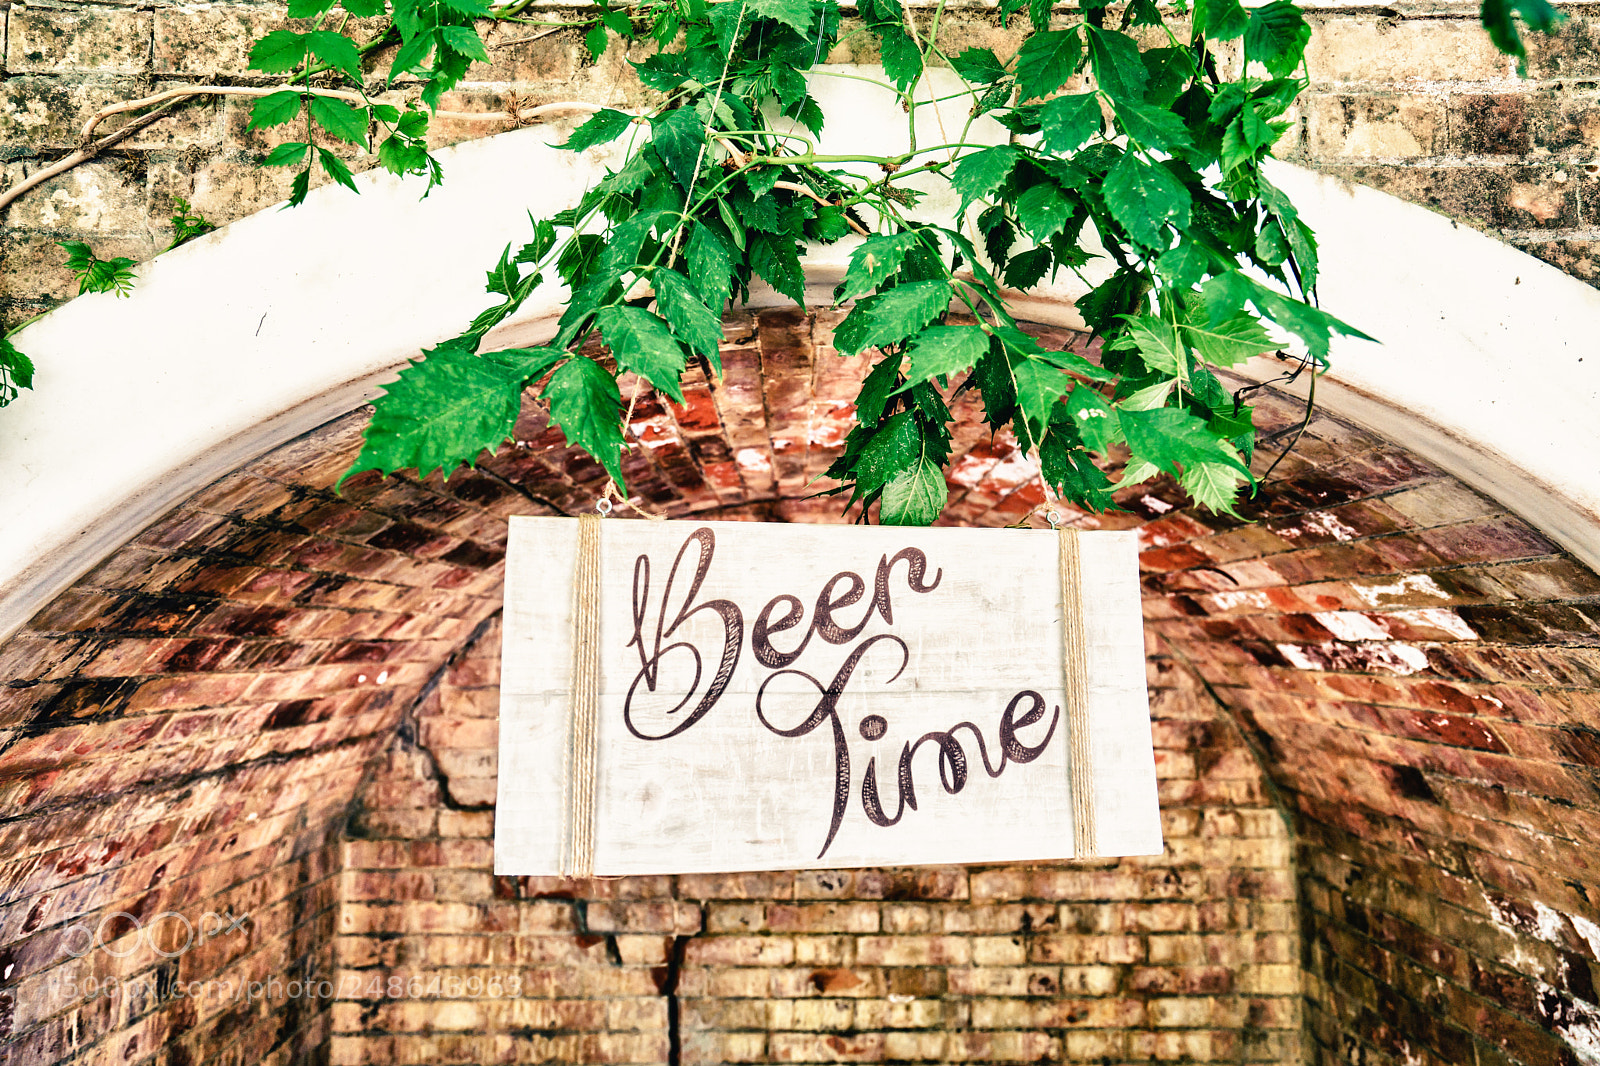 Sony a7 II sample photo. Beer time signboard in photography